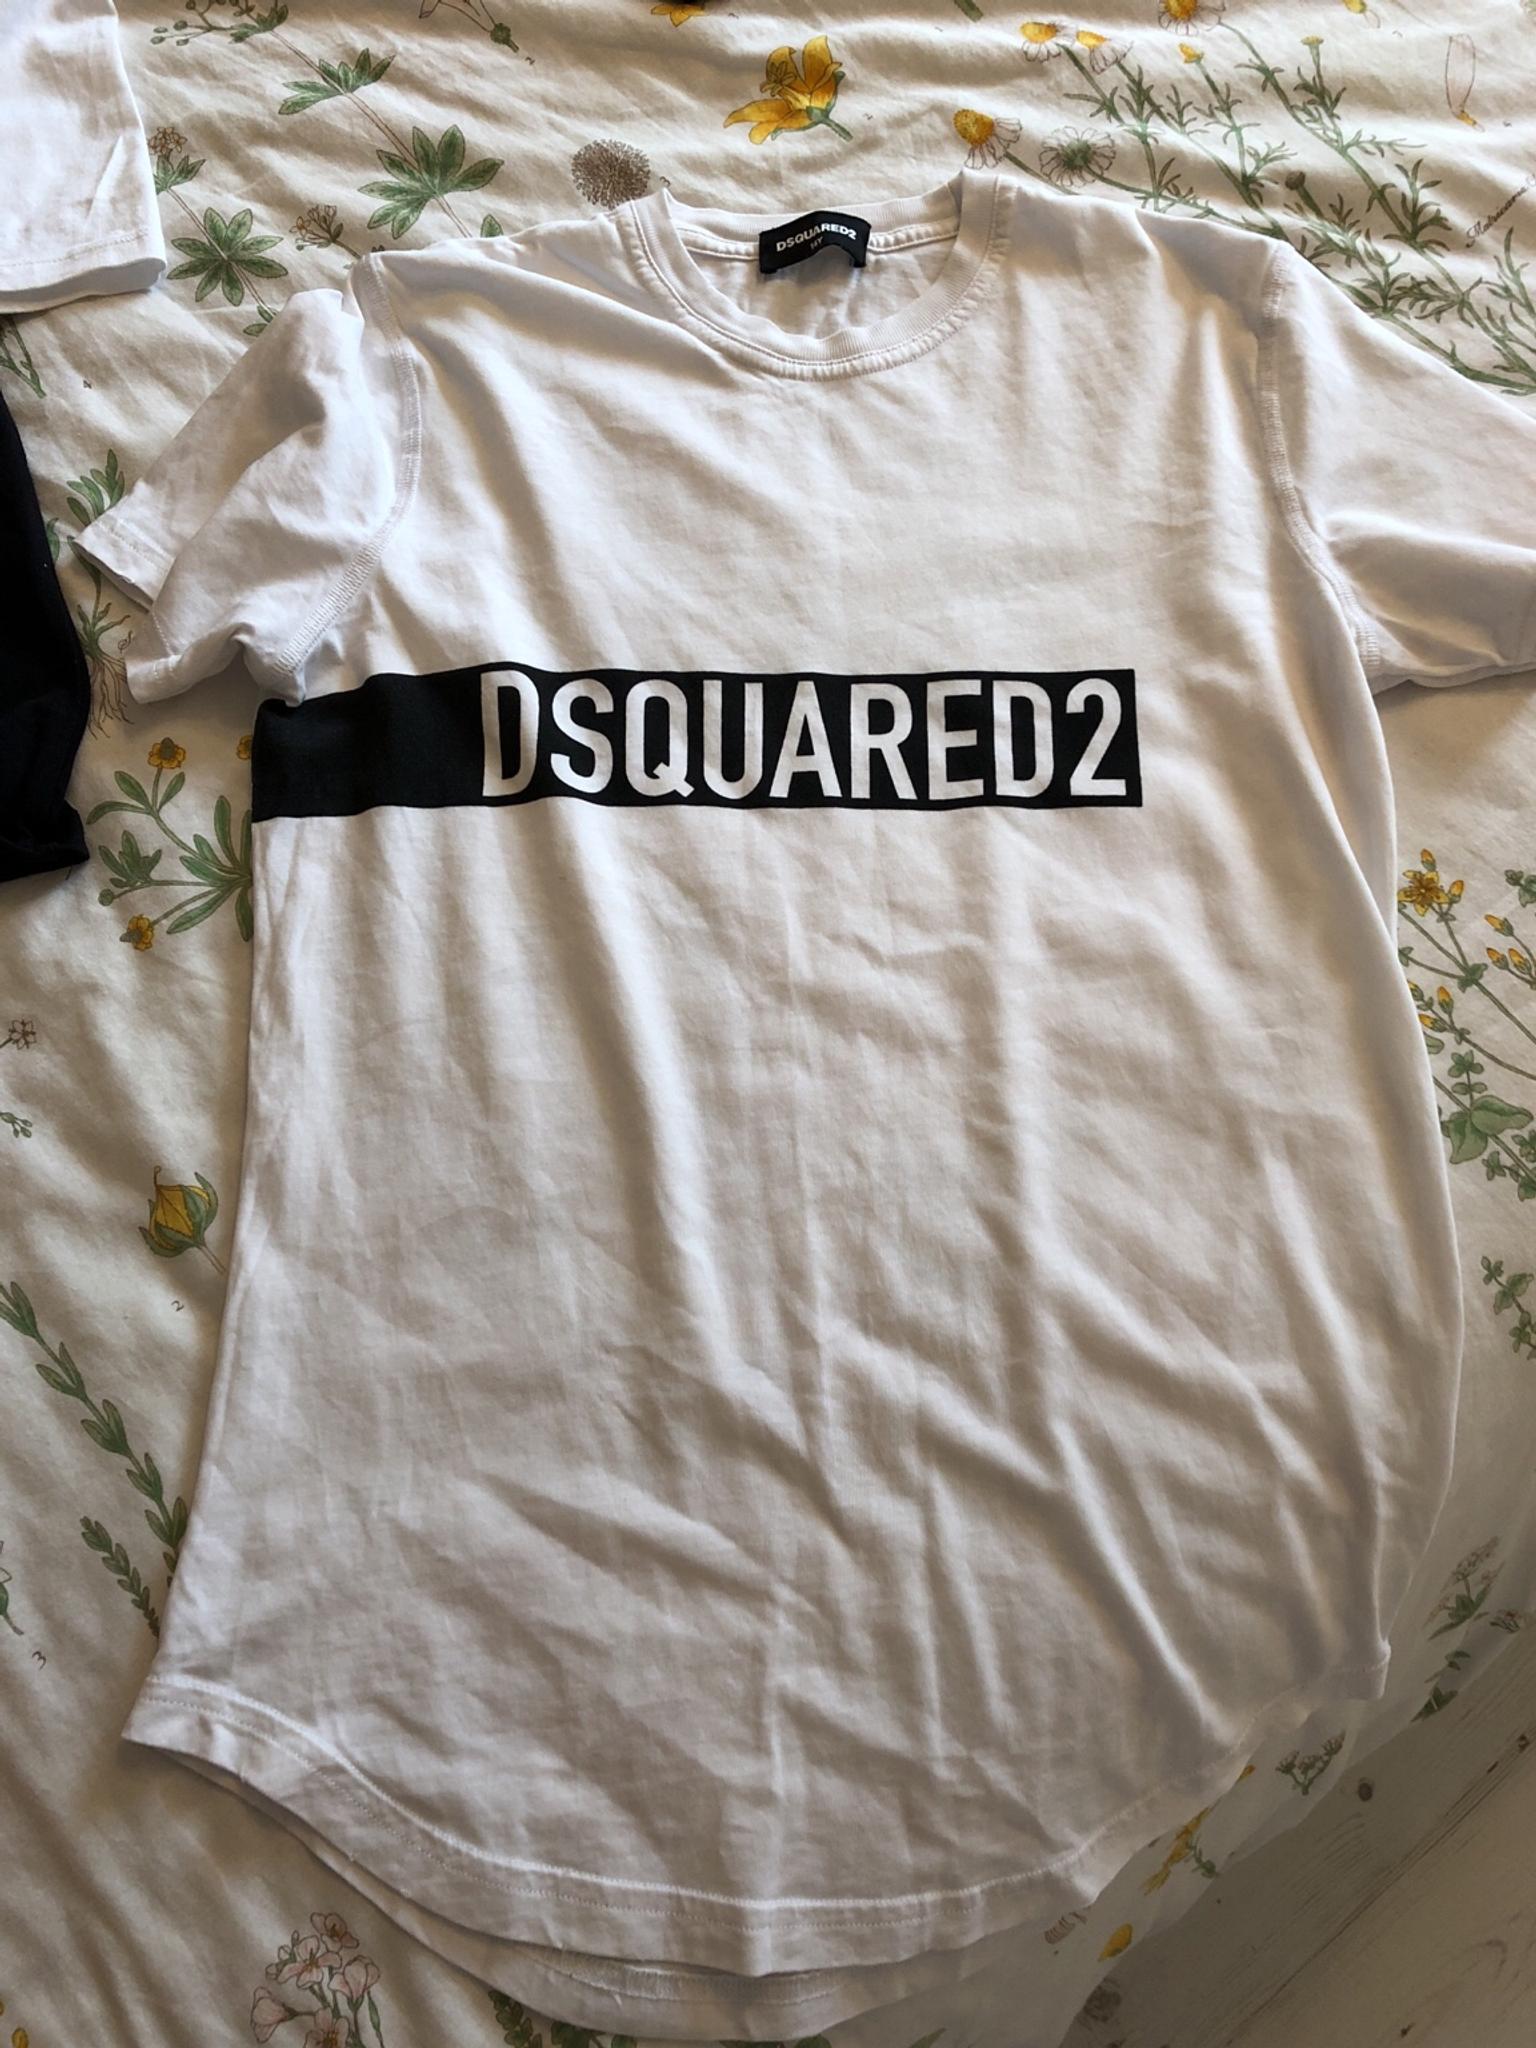 dsquared t shirt baby